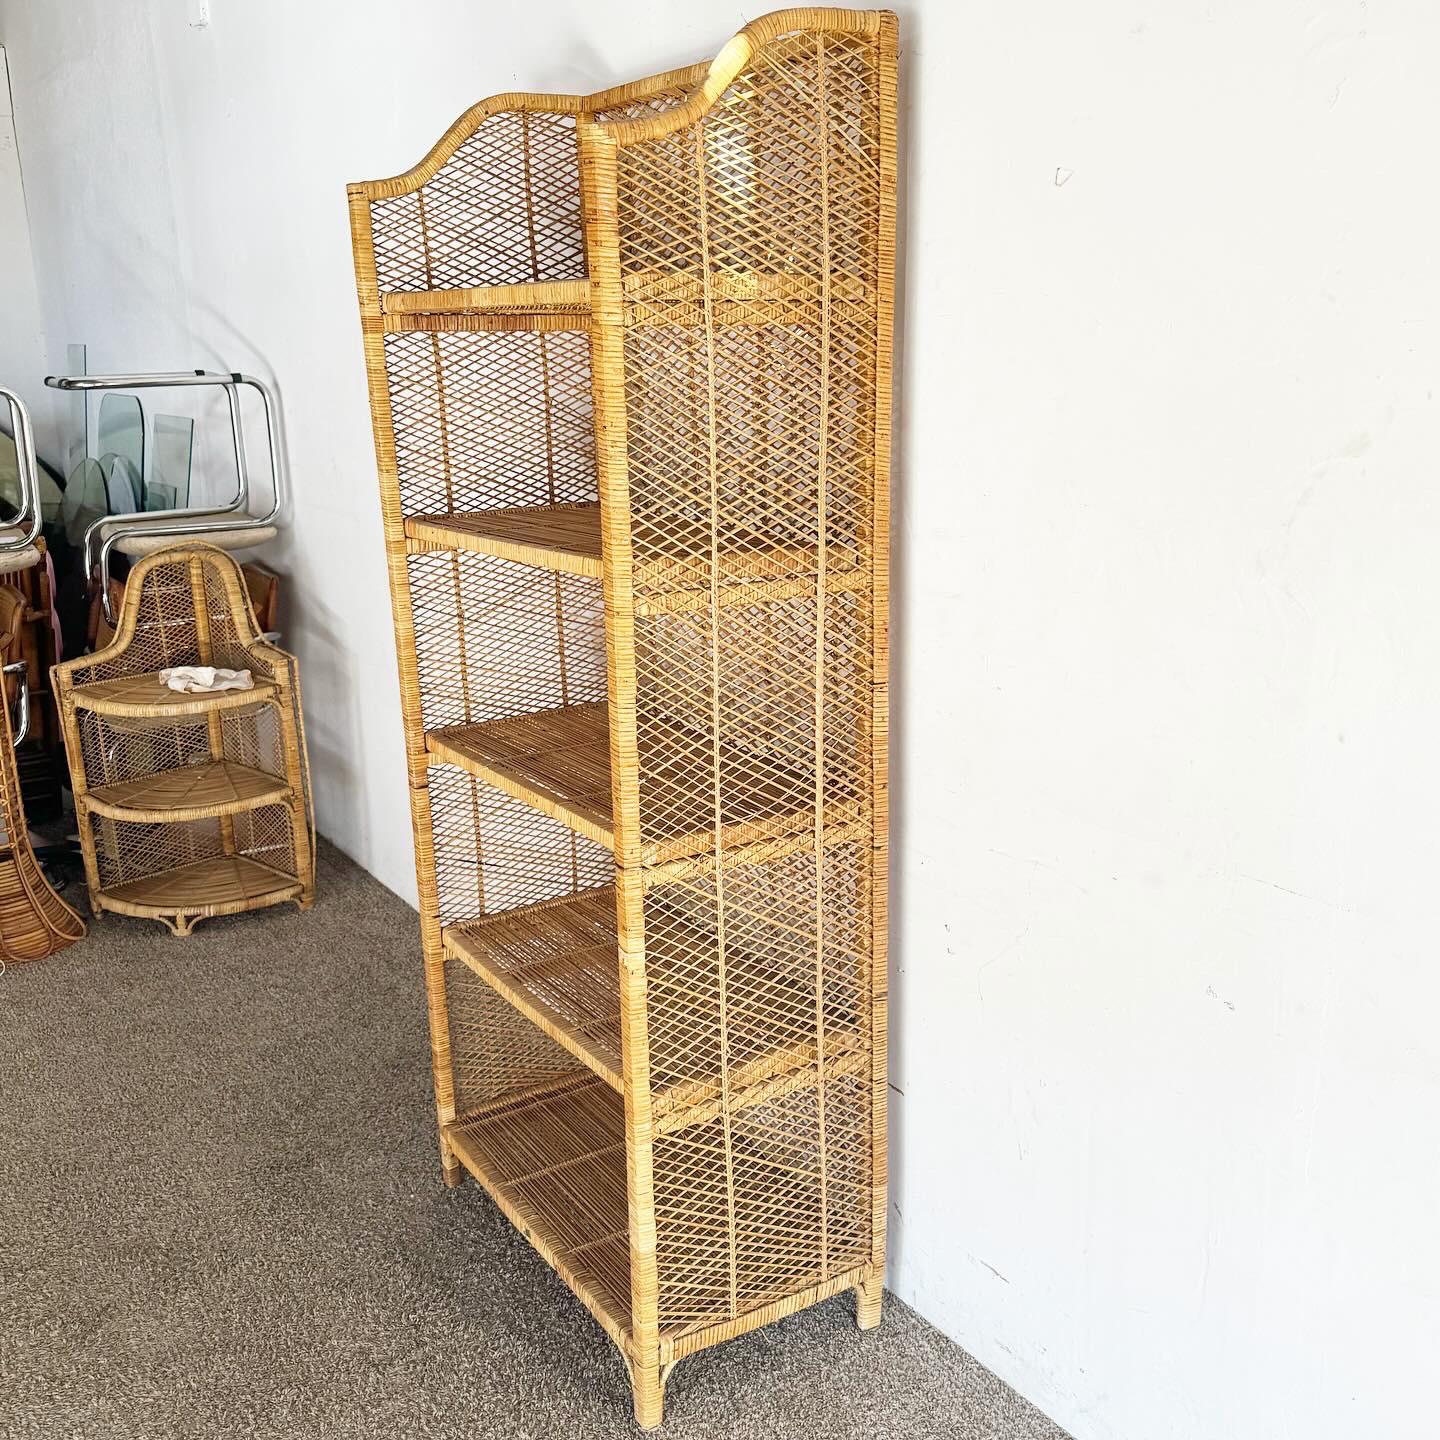 Philippine Boho Chic Wicker Rattan Etagere With 4 Removable Shelves For Sale